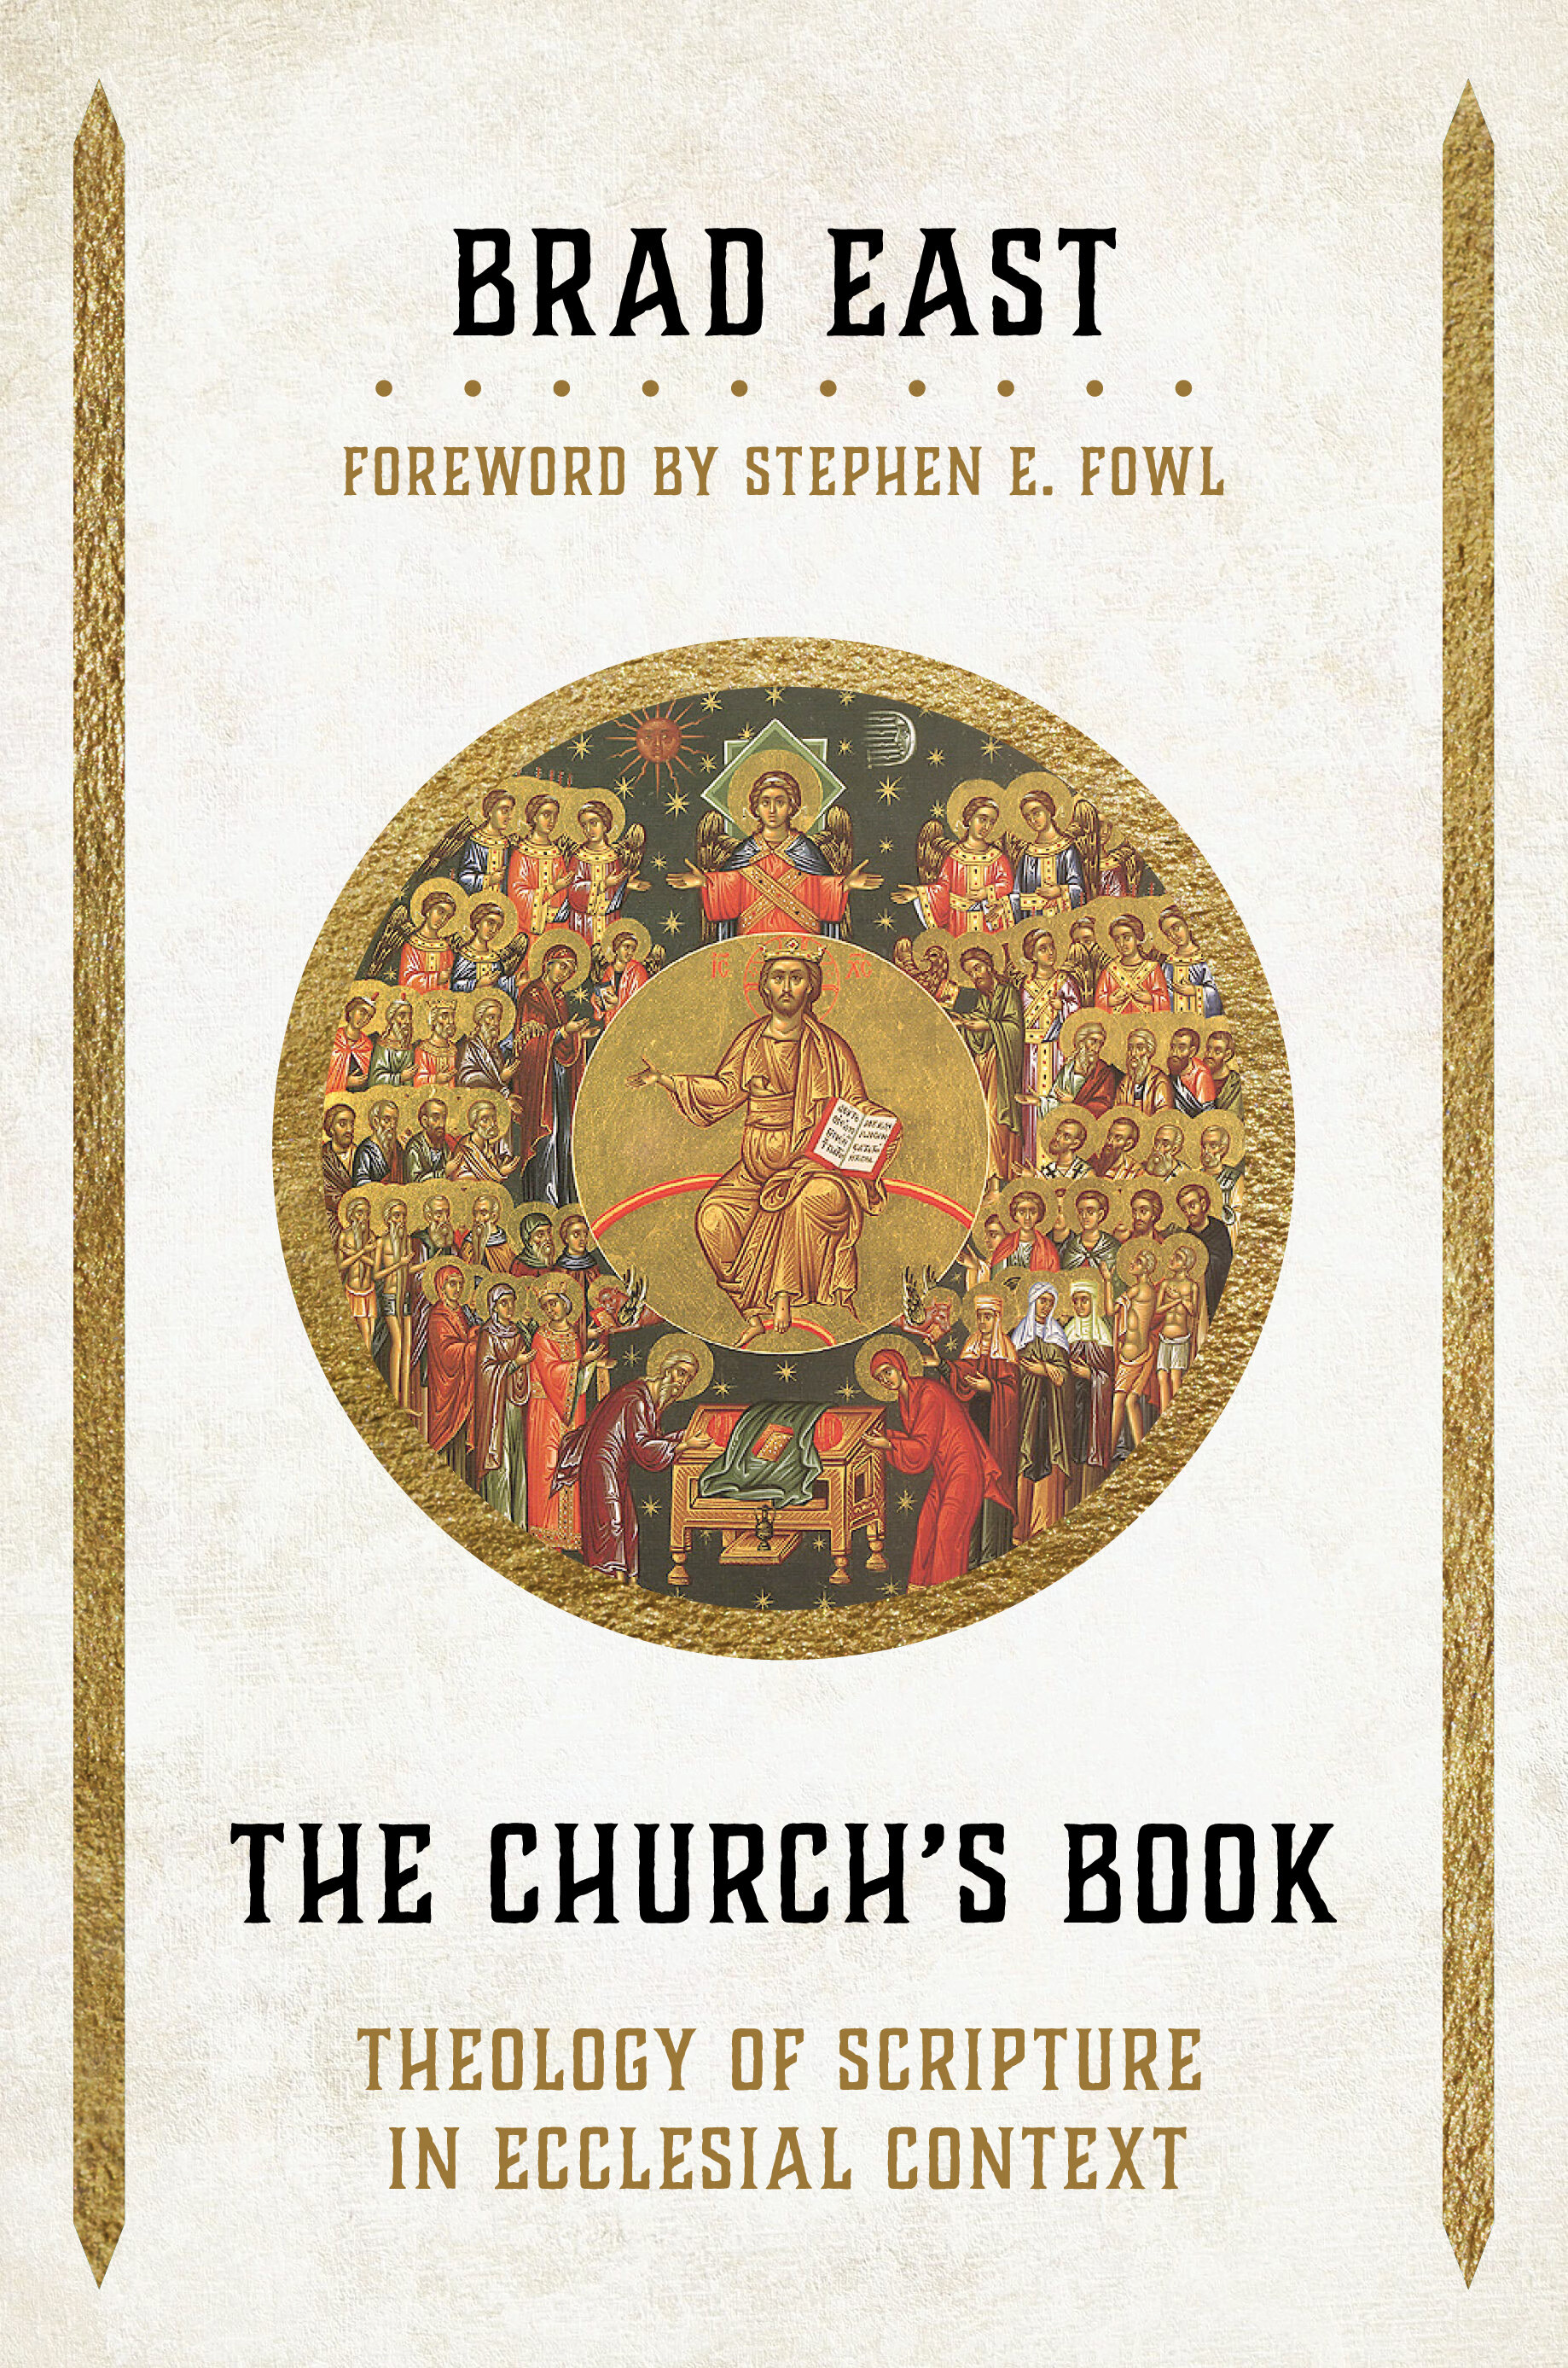 Brief Book Review: The Church’s Book